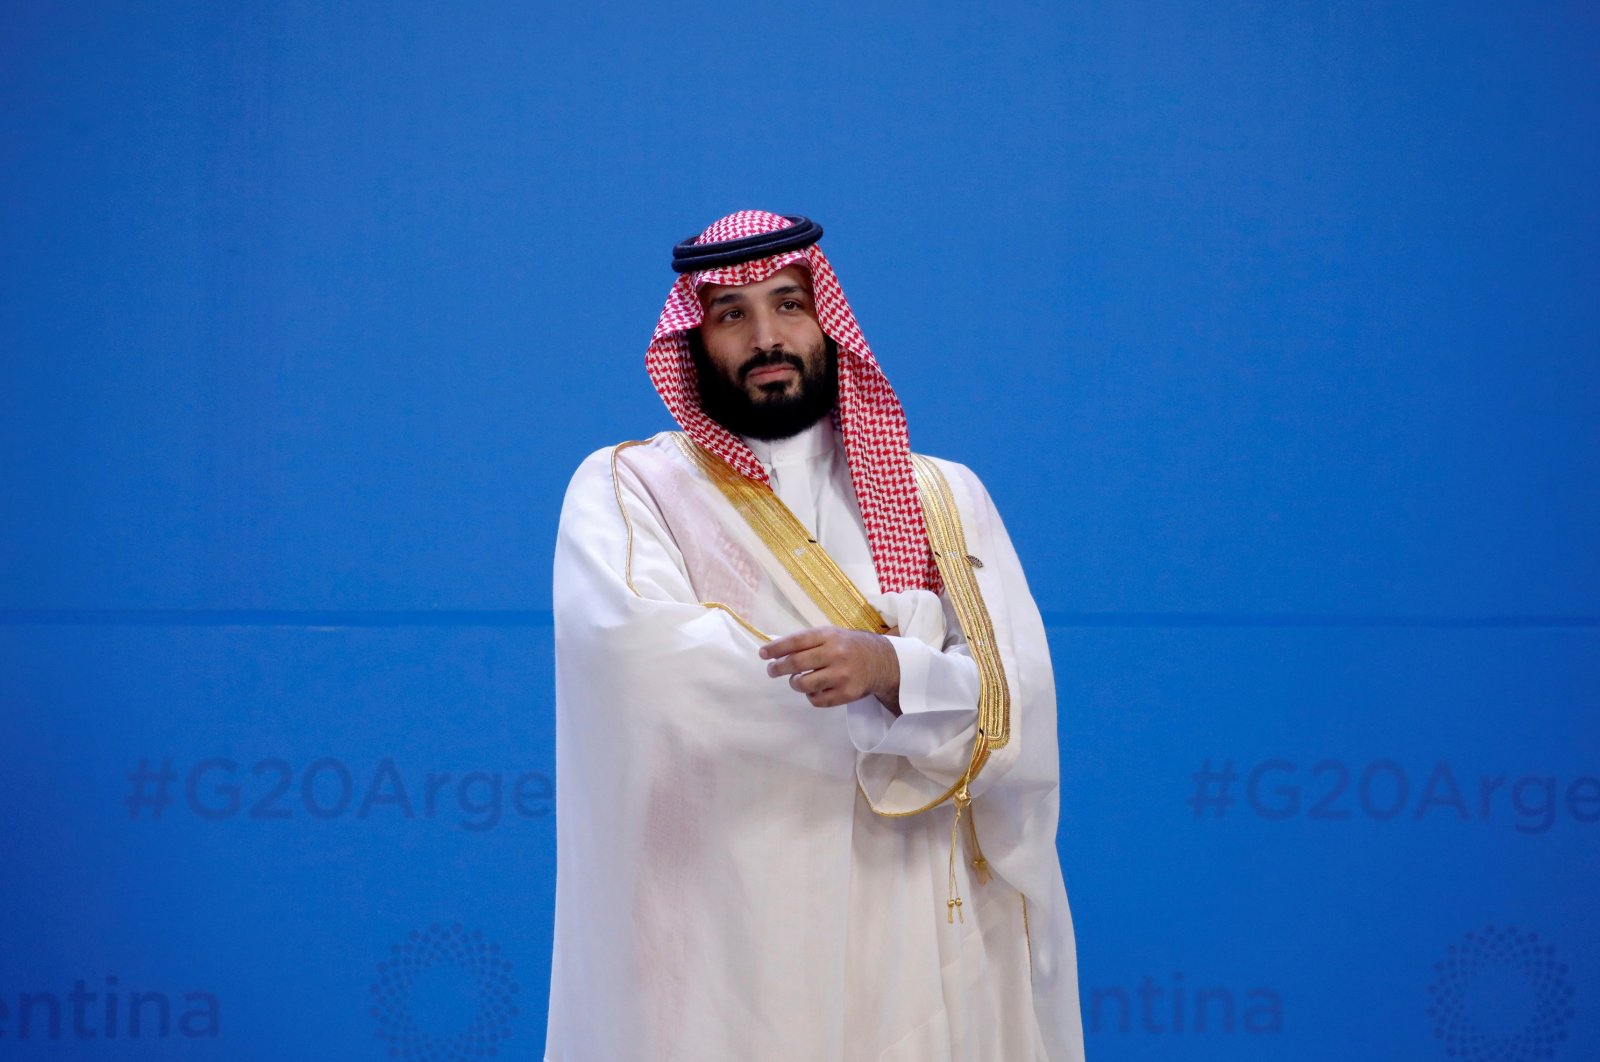 Saudi Arabia's Crown Prince Mohammed bin Salman waits for the family photo during the G-20 summit, Buenos Aires, Argentina, Nov. 30, 2018. (Reuters Photo)